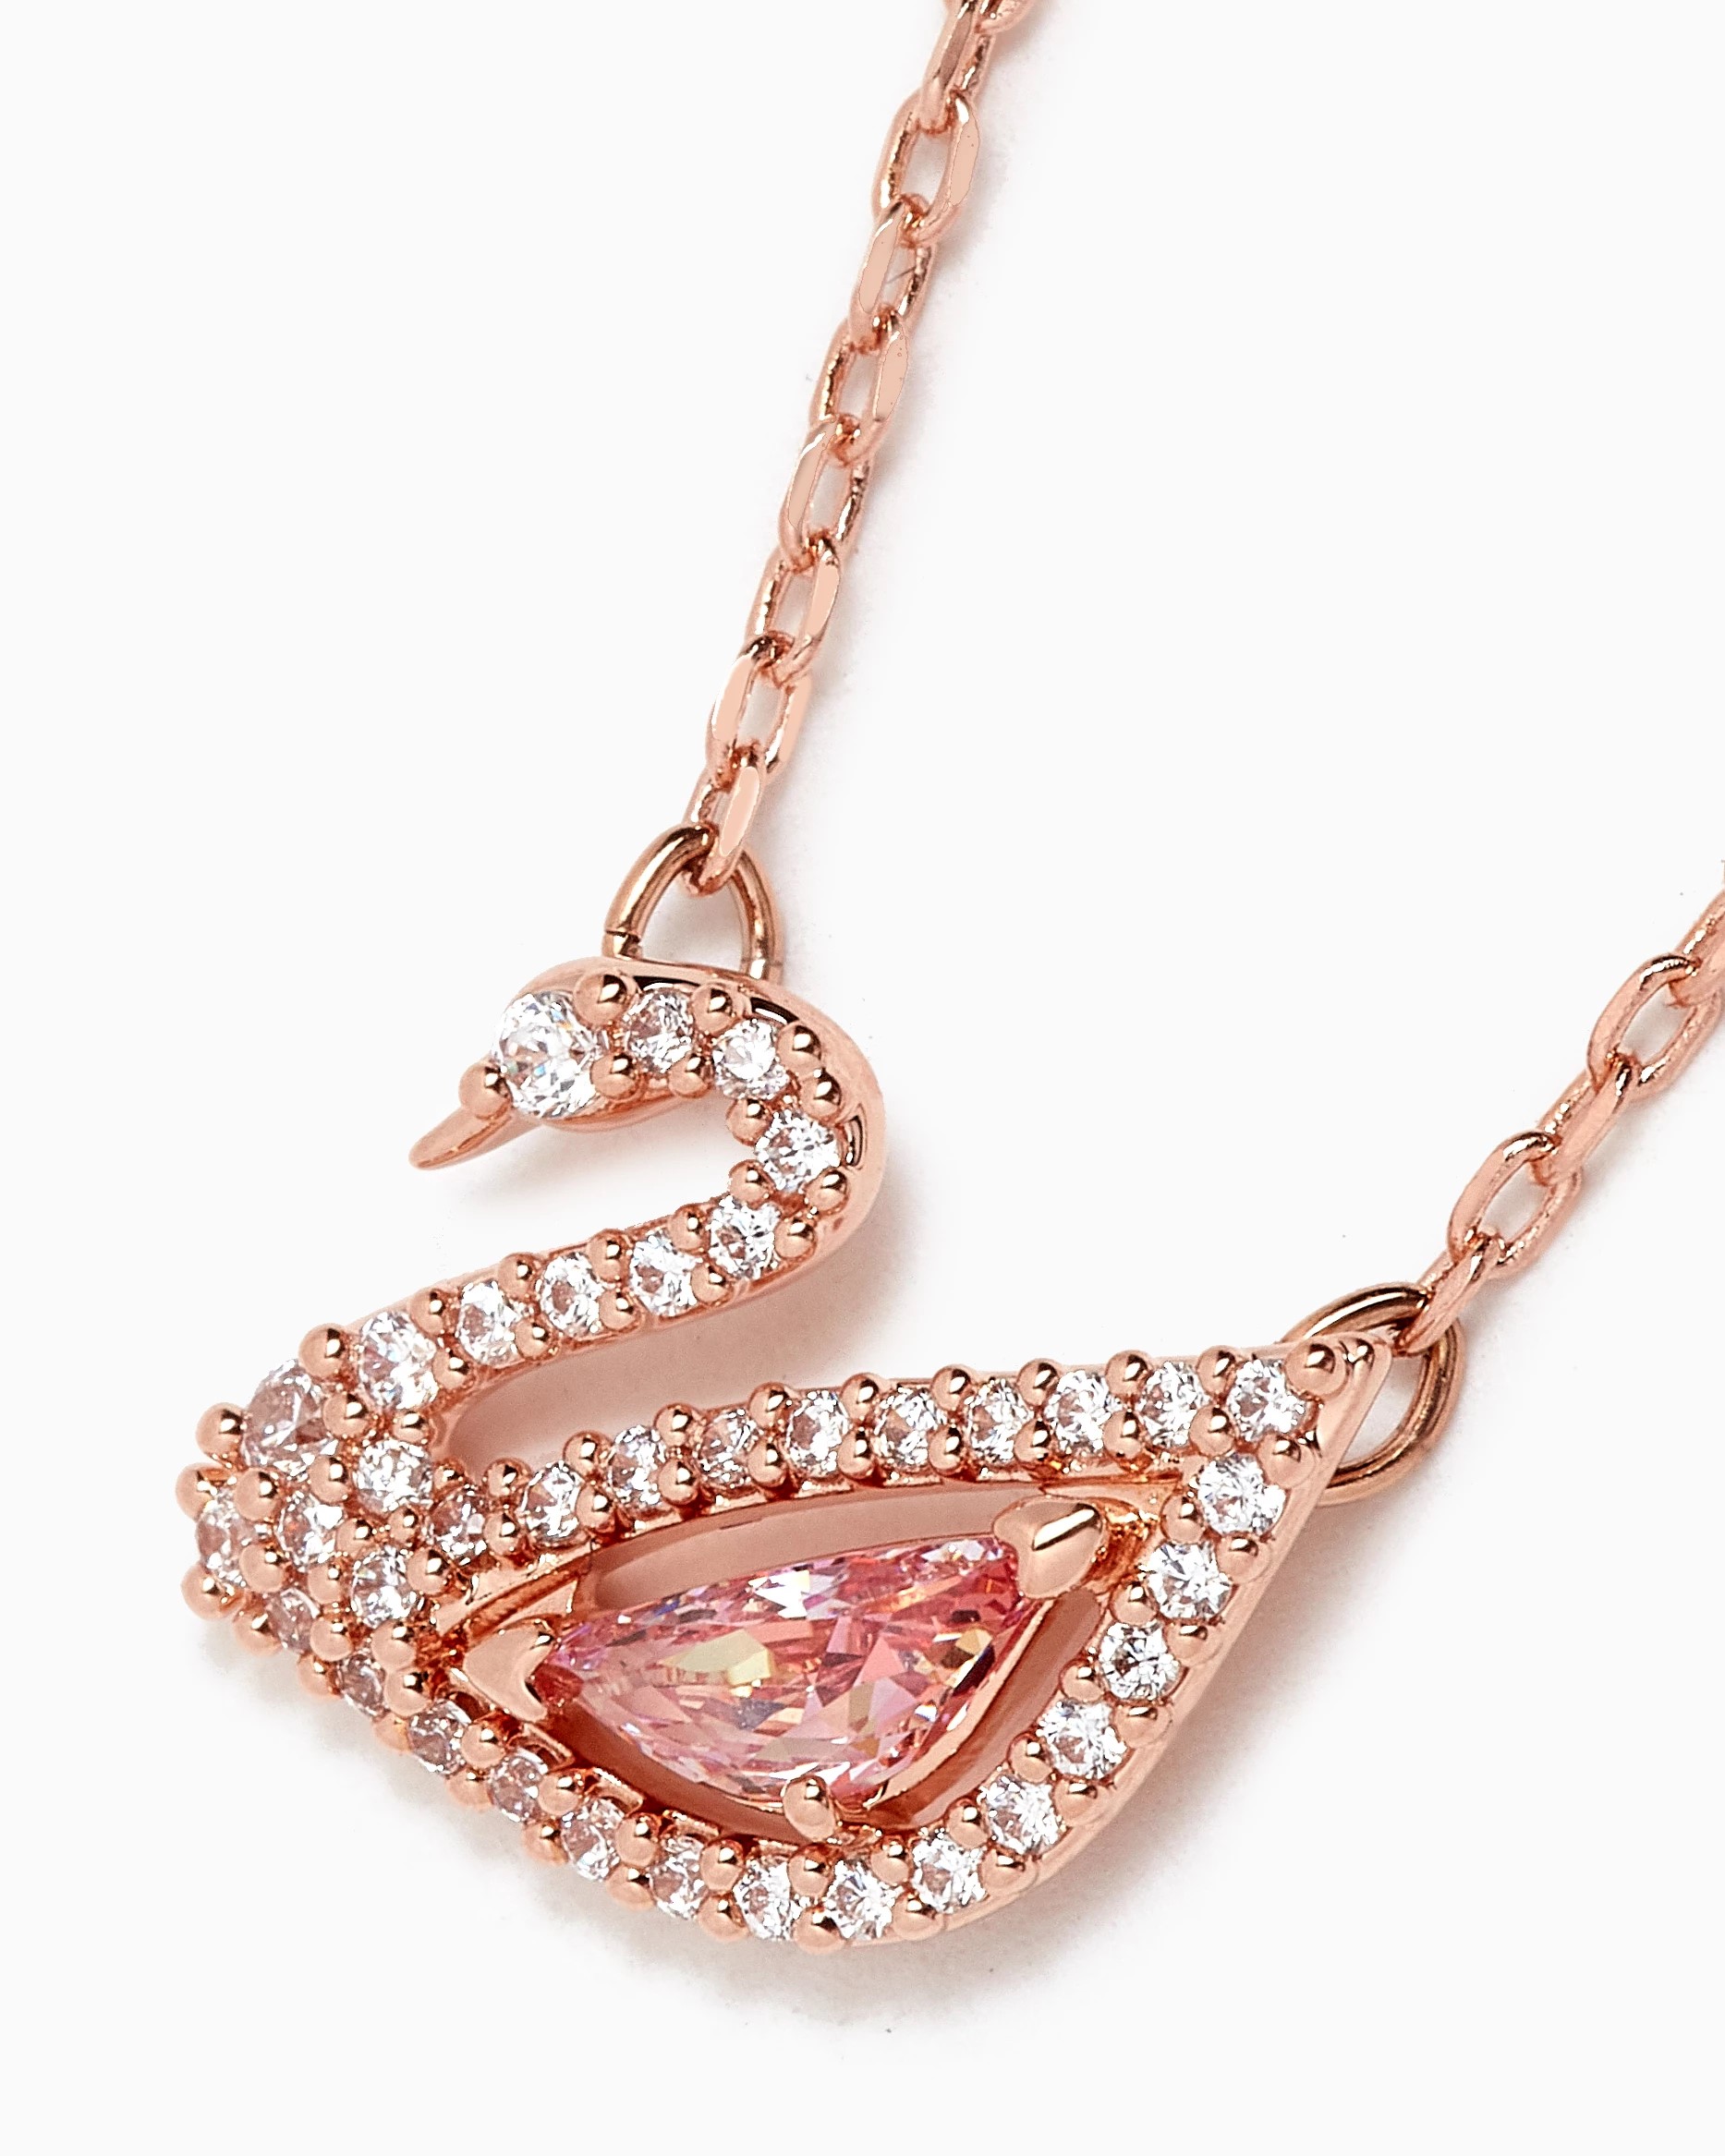 SET DÂY CHUYỀN VÒNG ĐEO TAY SWAROVSKI DAZZLING SWAN NECKLACE MULTI-COLORED ROSE-GOLD TONE PLATED 5469989 15